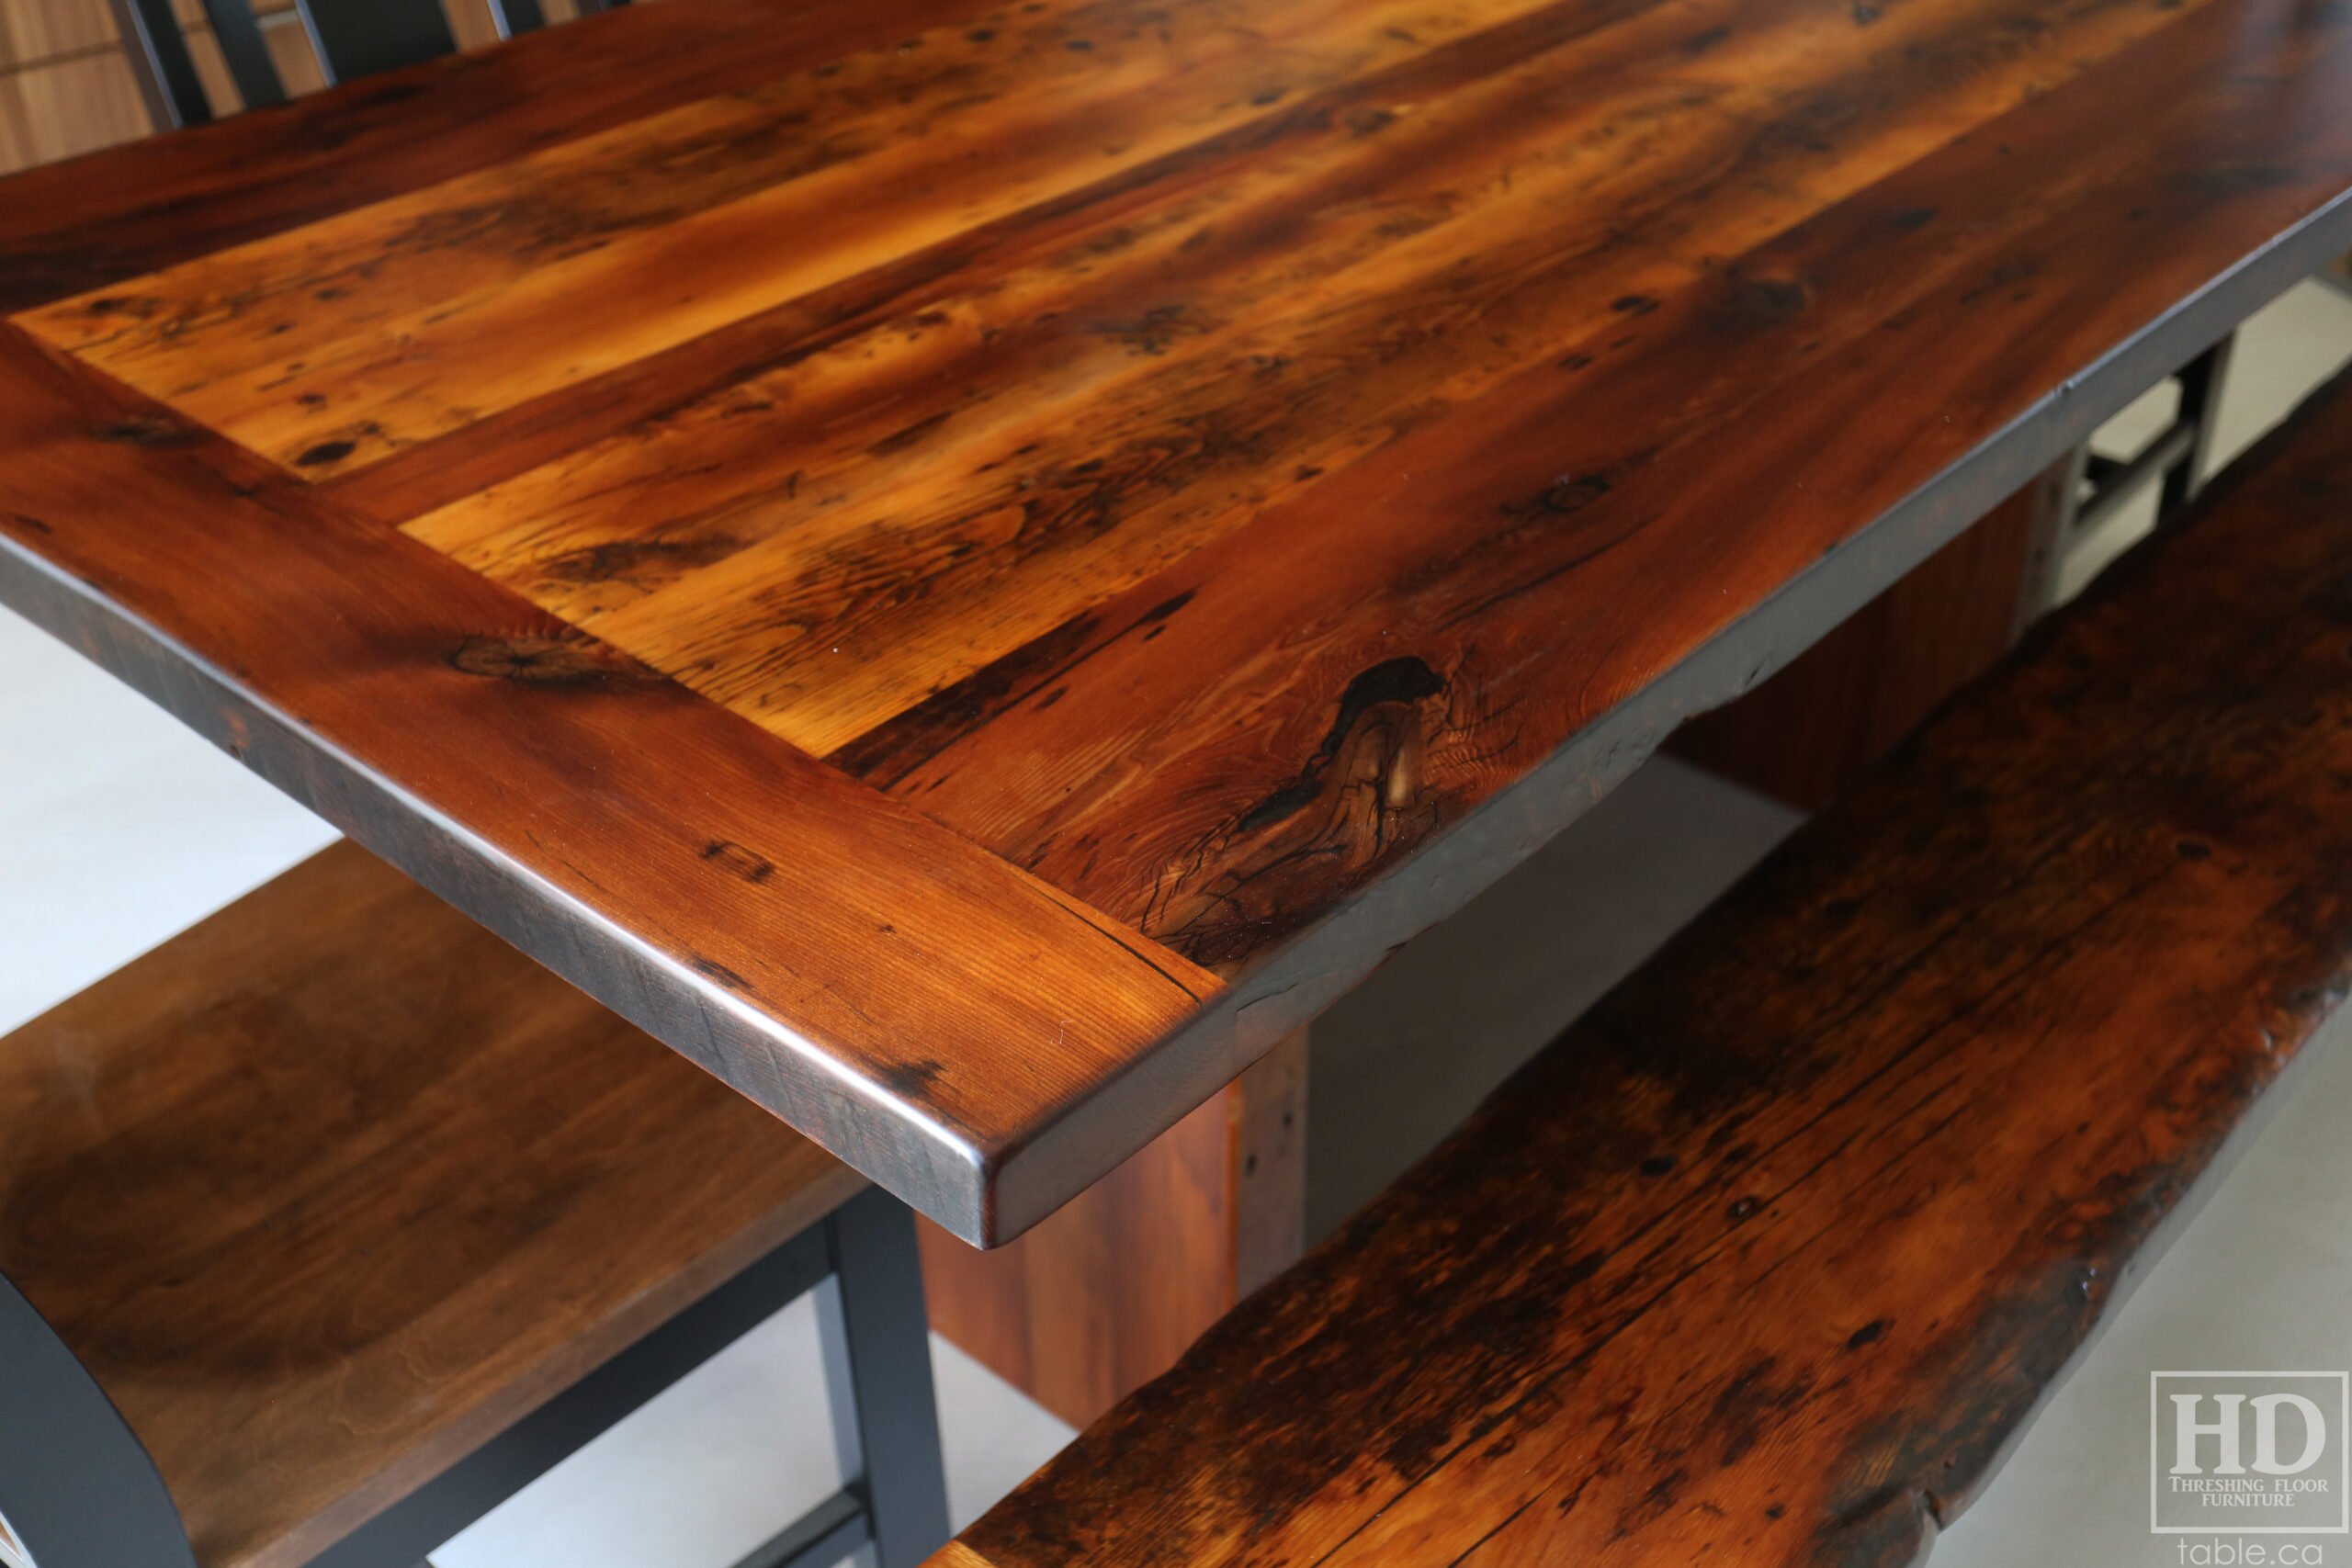 74" Reclaimed Ontario Barnwood Table - 48" wide - Plank Base Option - Old Growth Hemlock Threshing Floor Construction - Original edges & distressing maintained - Premium epoxy + matte polyurethane finish - 74" [matching] Plank Base Bench - 4 Modified Plank Back Chairs - 3 Saddle Stools - www.table.ca